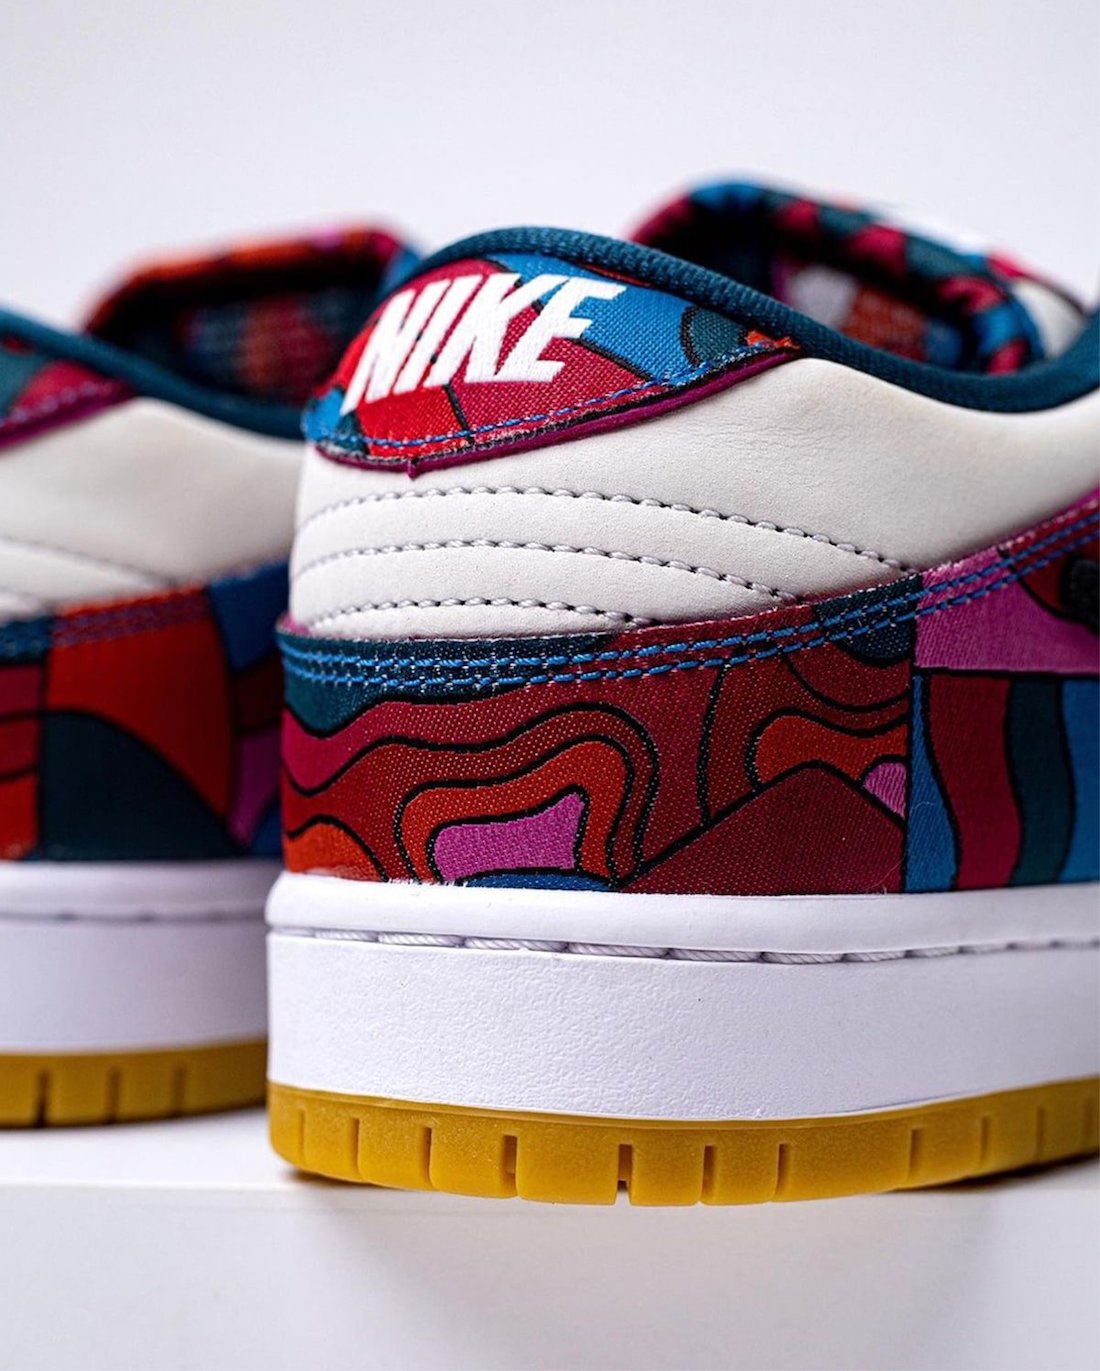 Parra Nike SB Dunk Low DH7695 600 Release Date 12